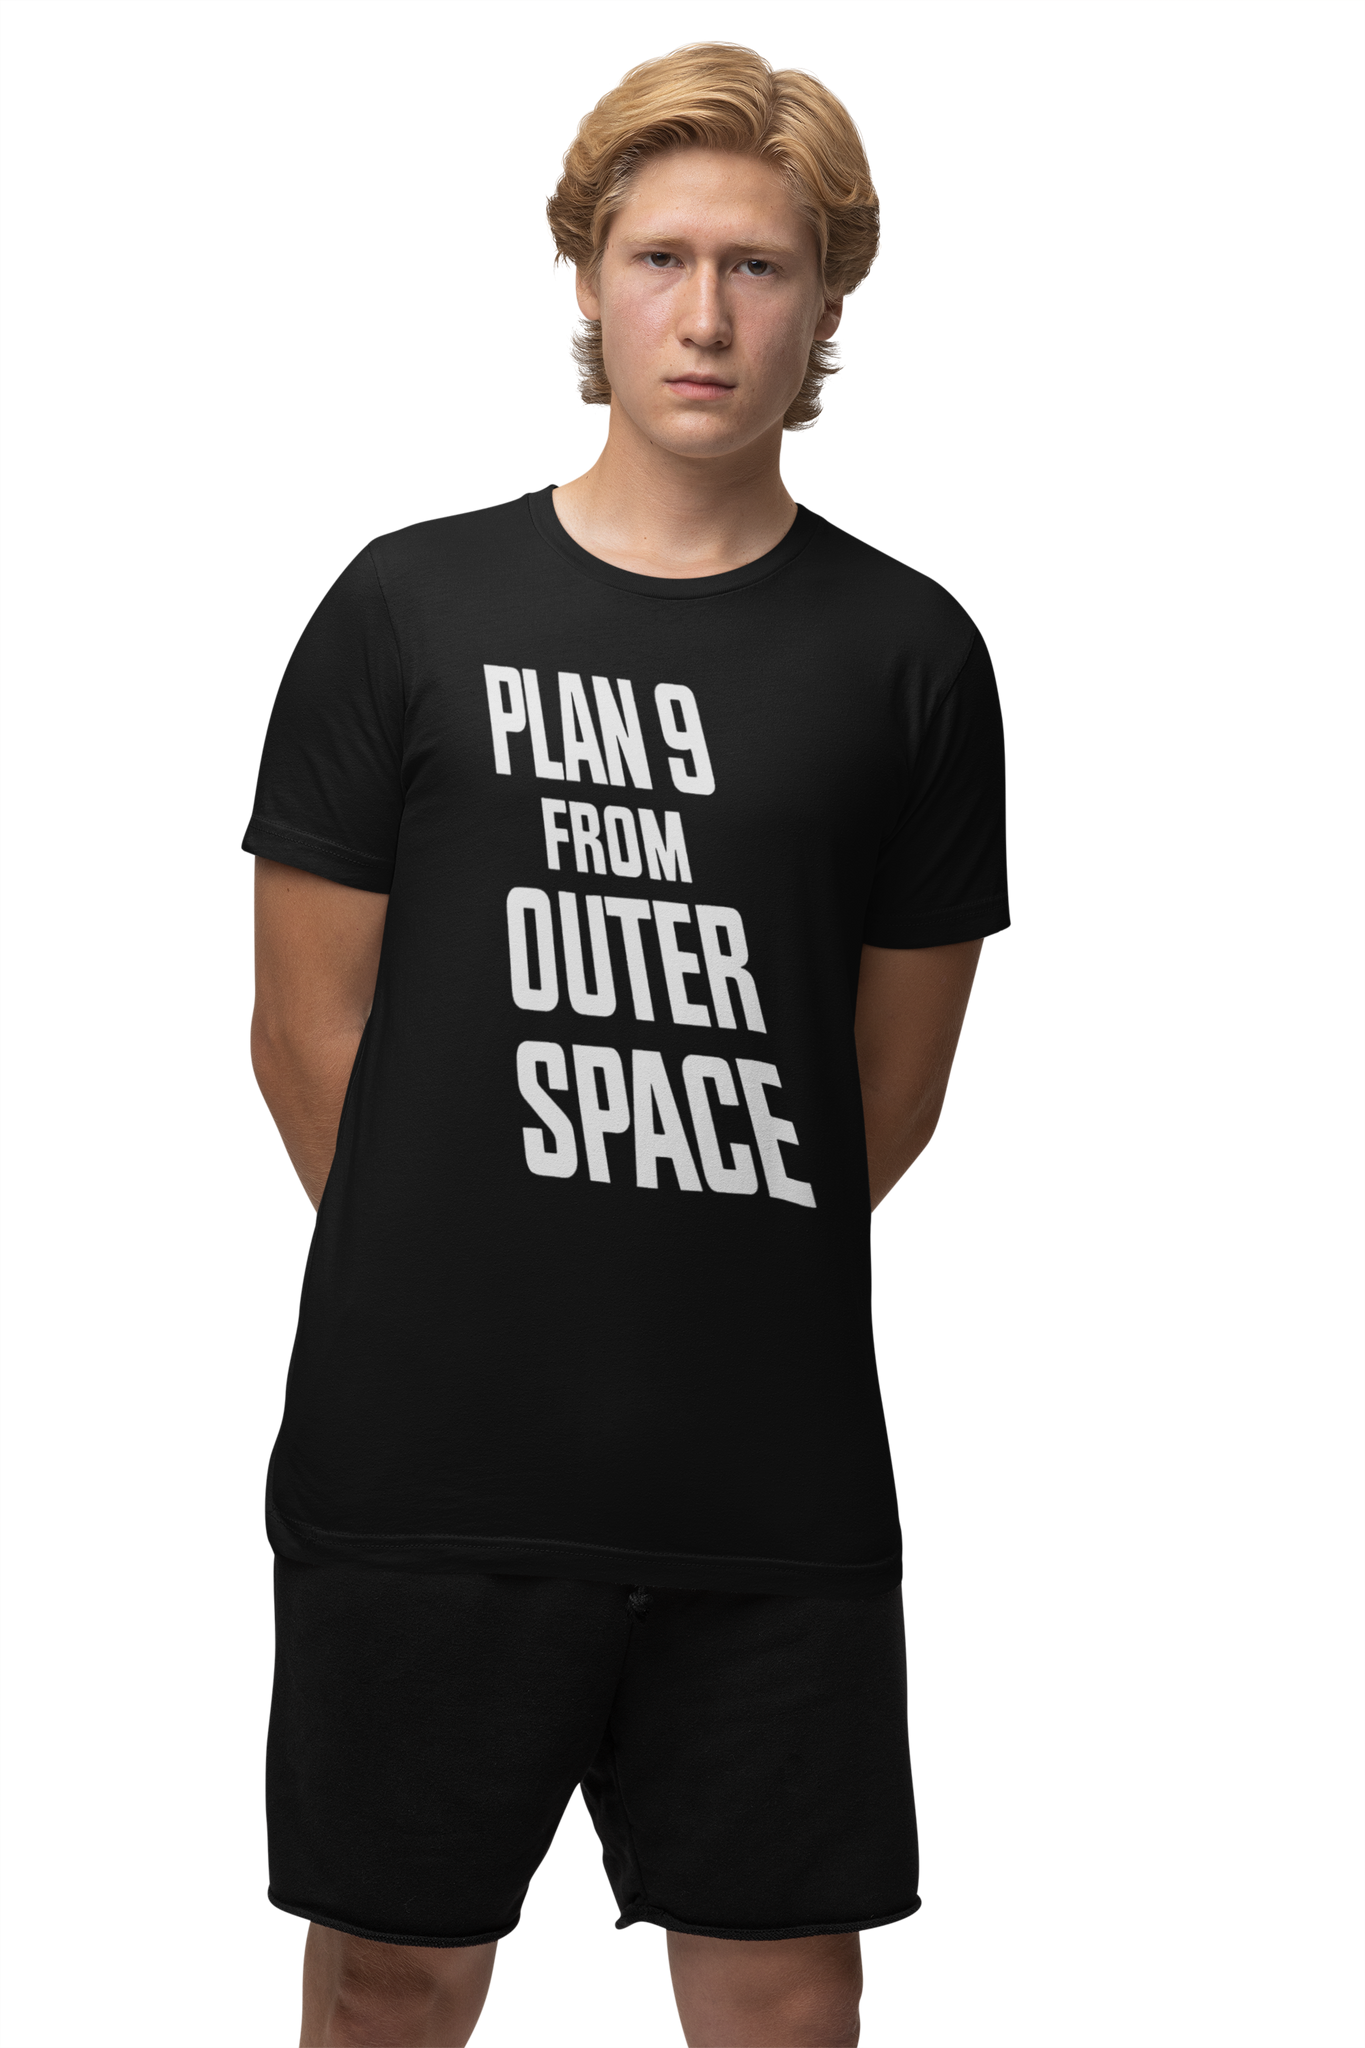 ATOM AGE:  "PLAN 9 FROM OUTER SPACE" LOGO T-SHIRT